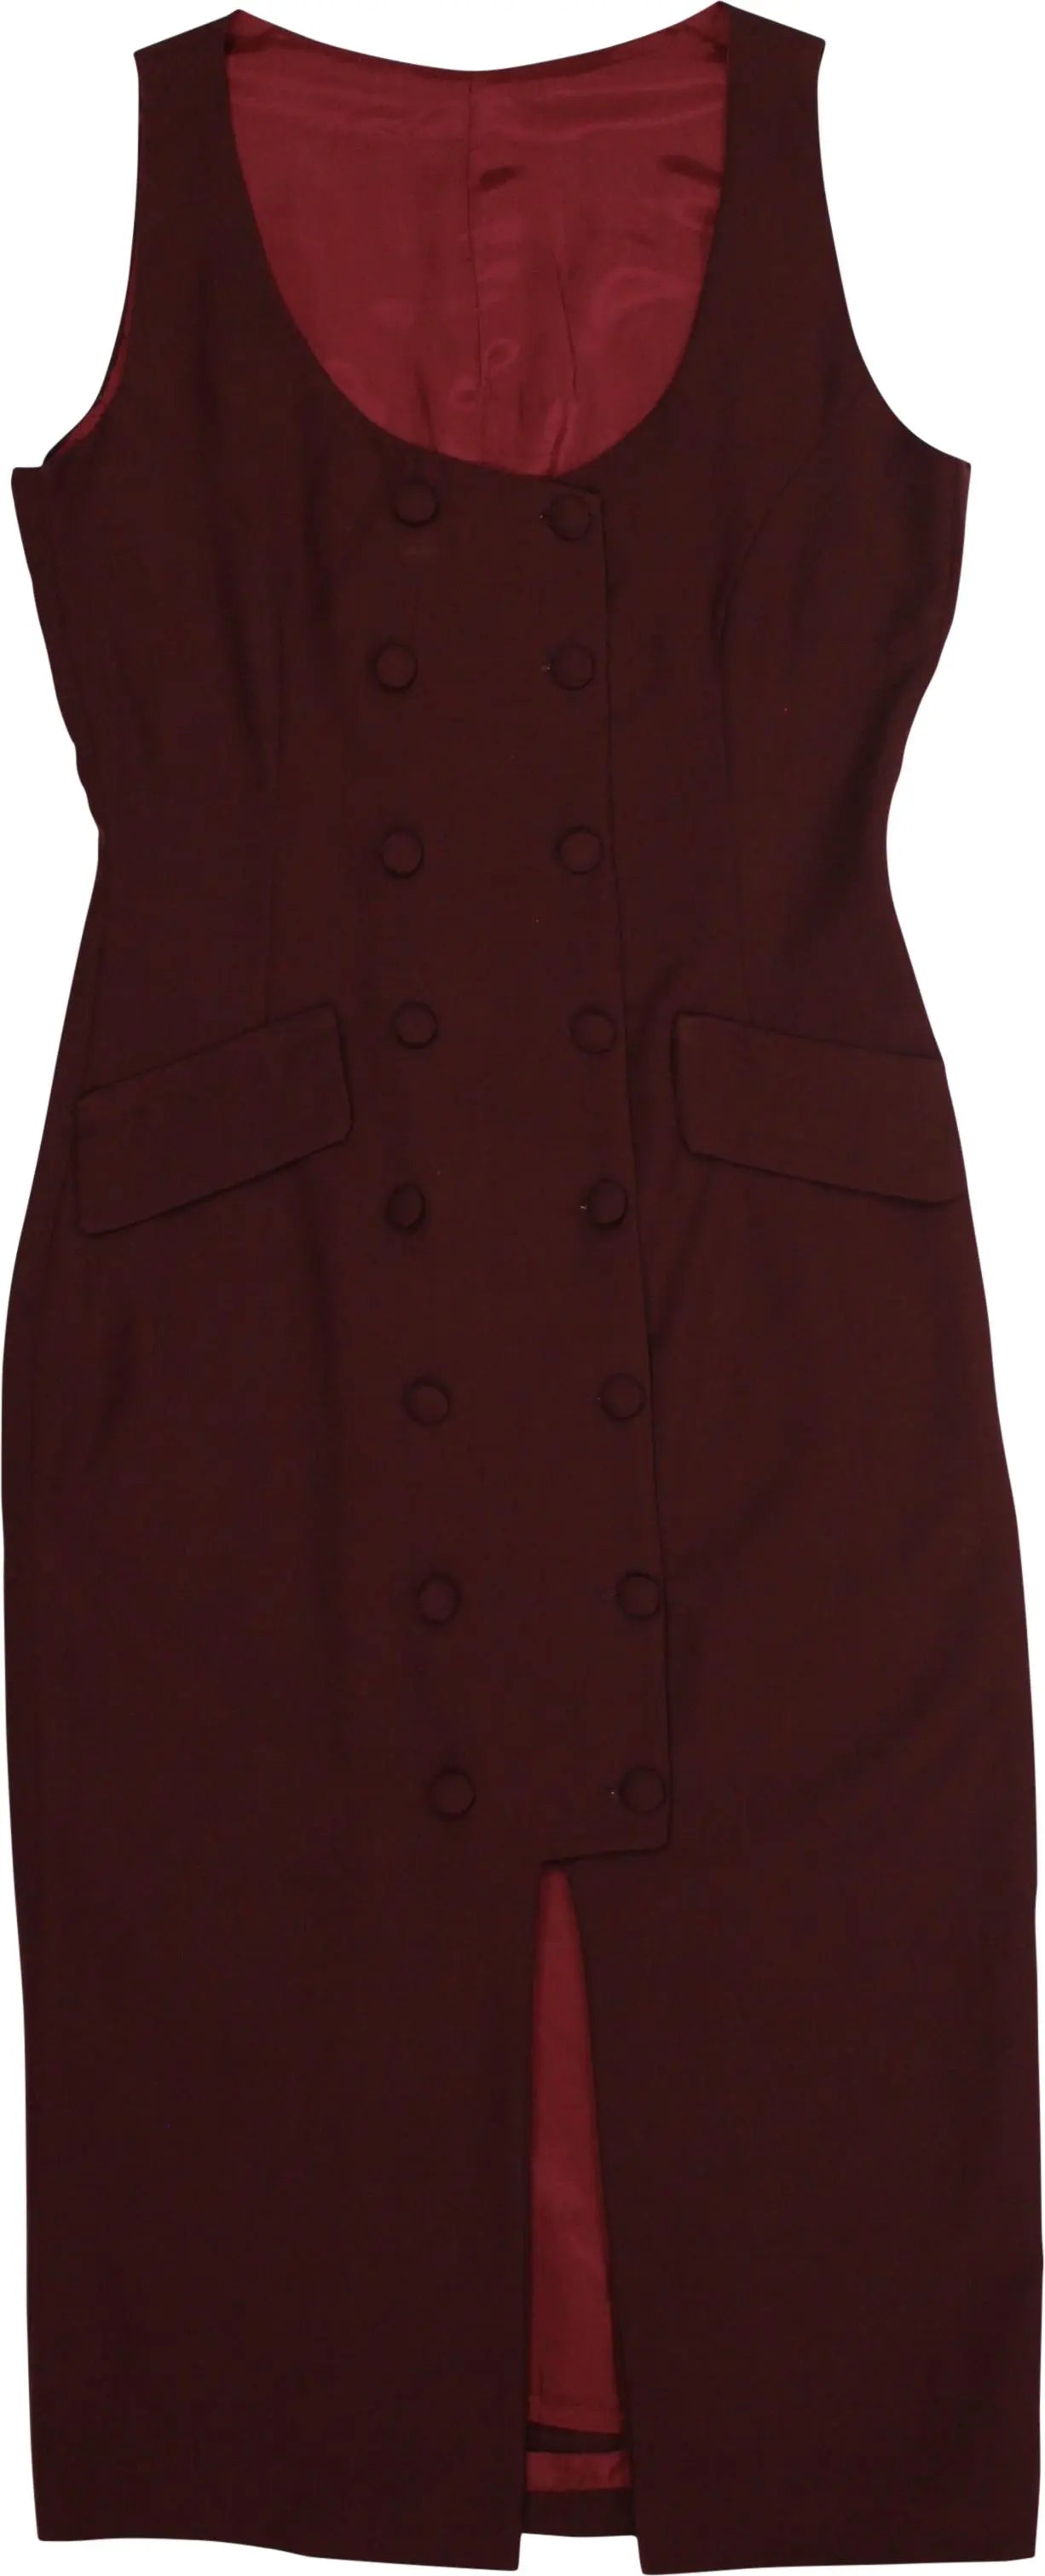 Unknown - Burgundy Dress- ThriftTale.com - Vintage and second handclothing